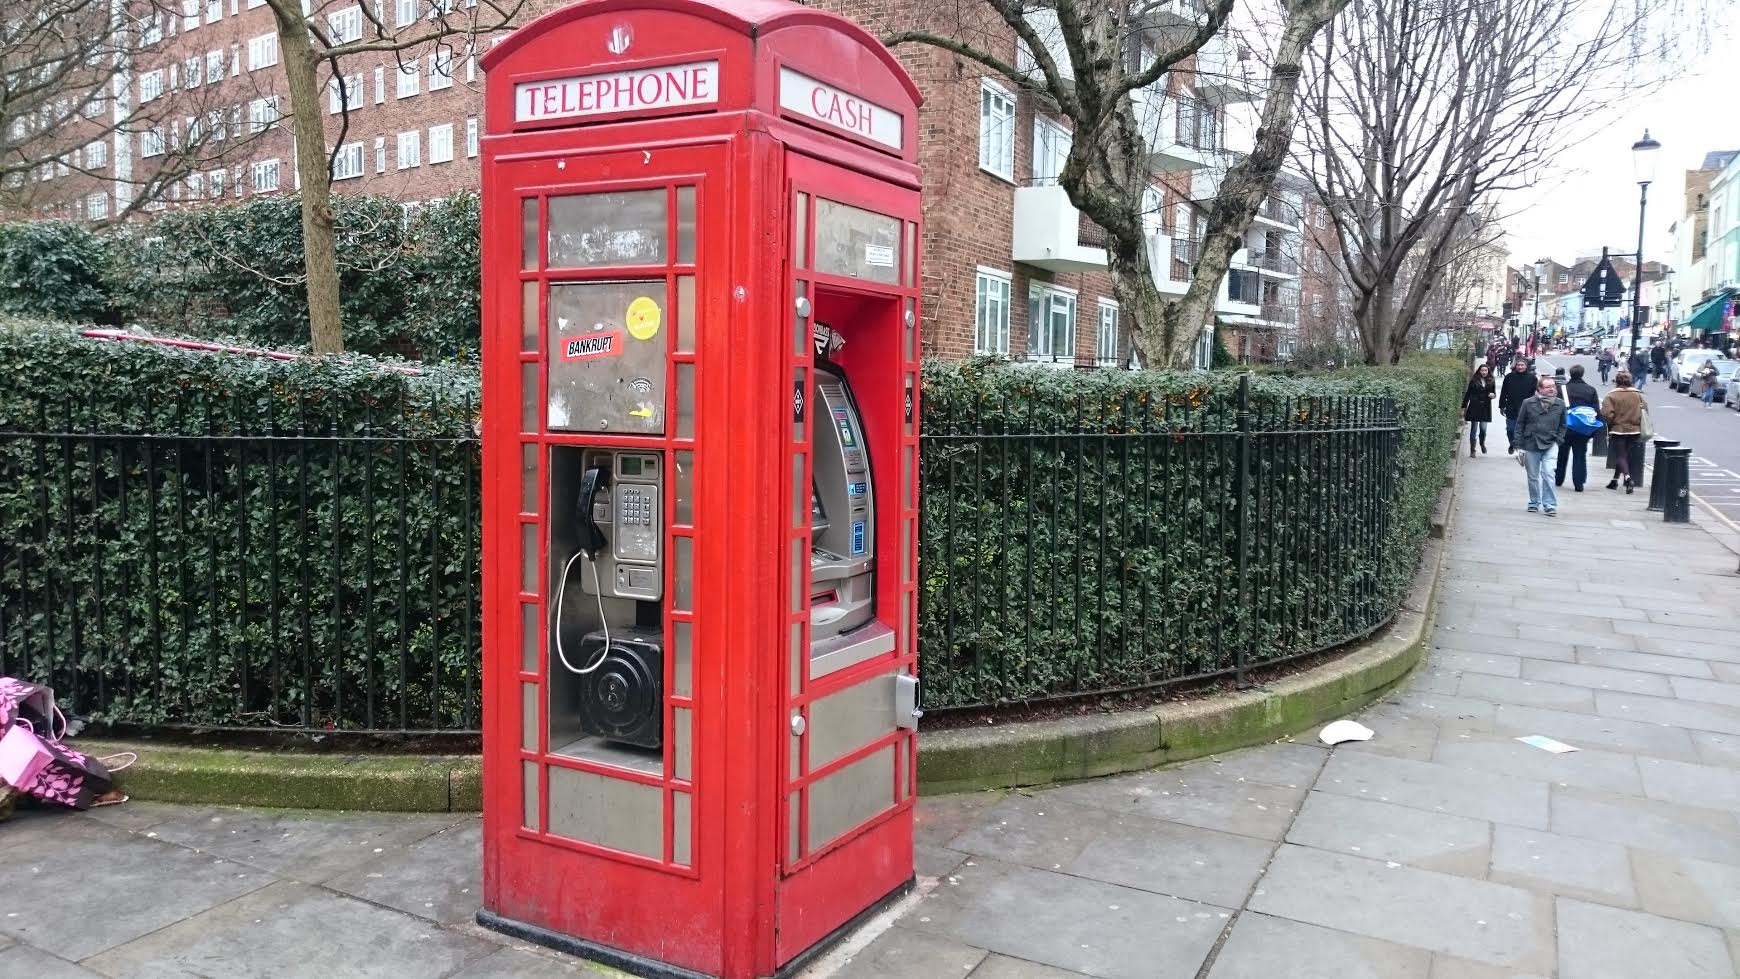 BT red telephone box converted to cash machine and public phone.